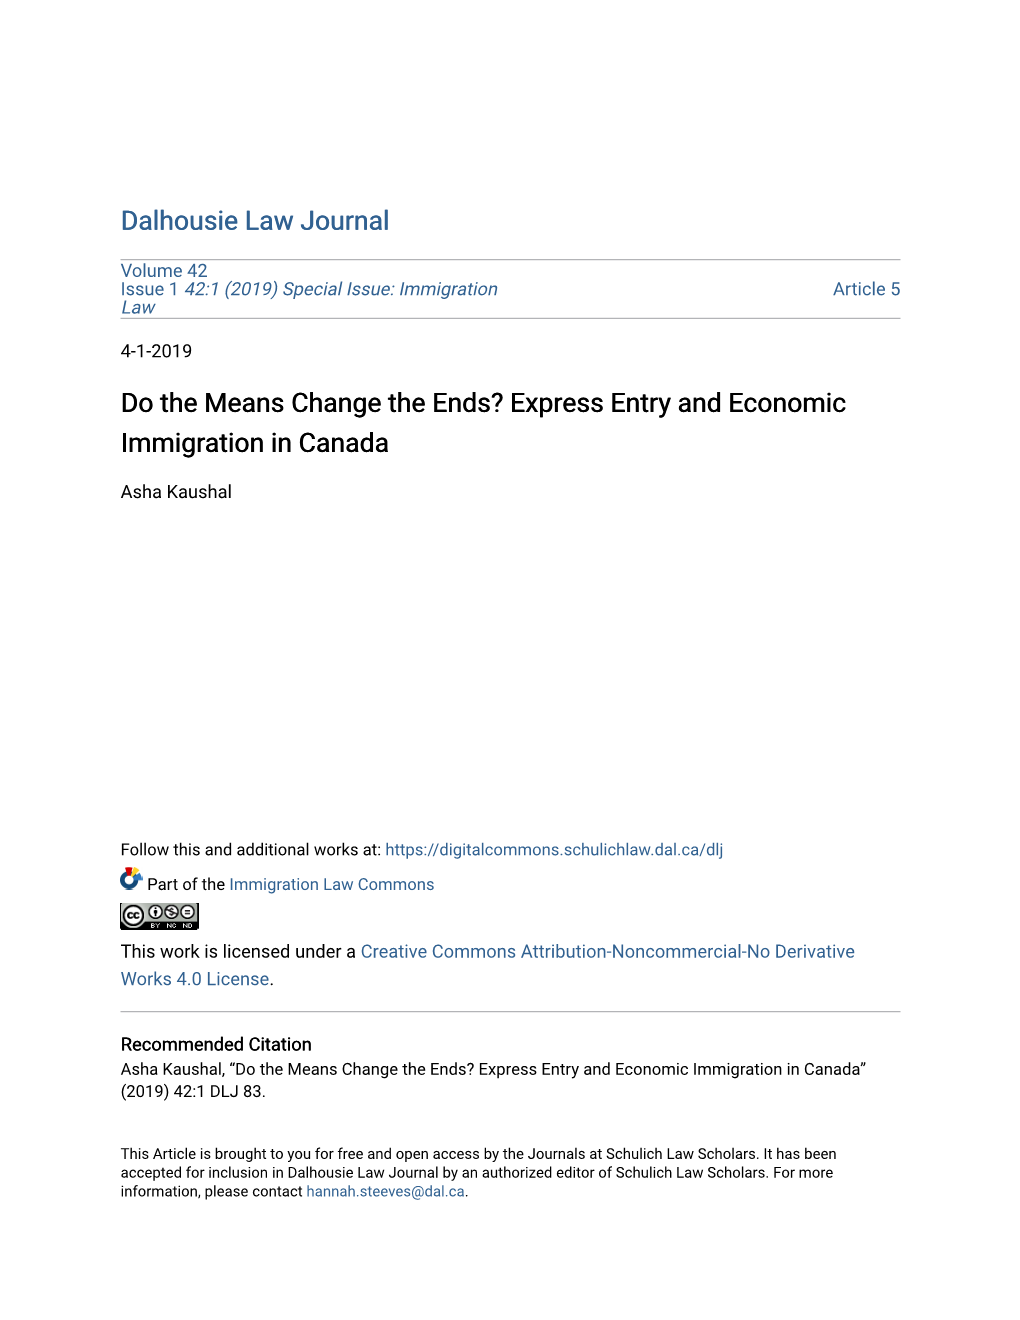 Express Entry and Economic Immigration in Canada